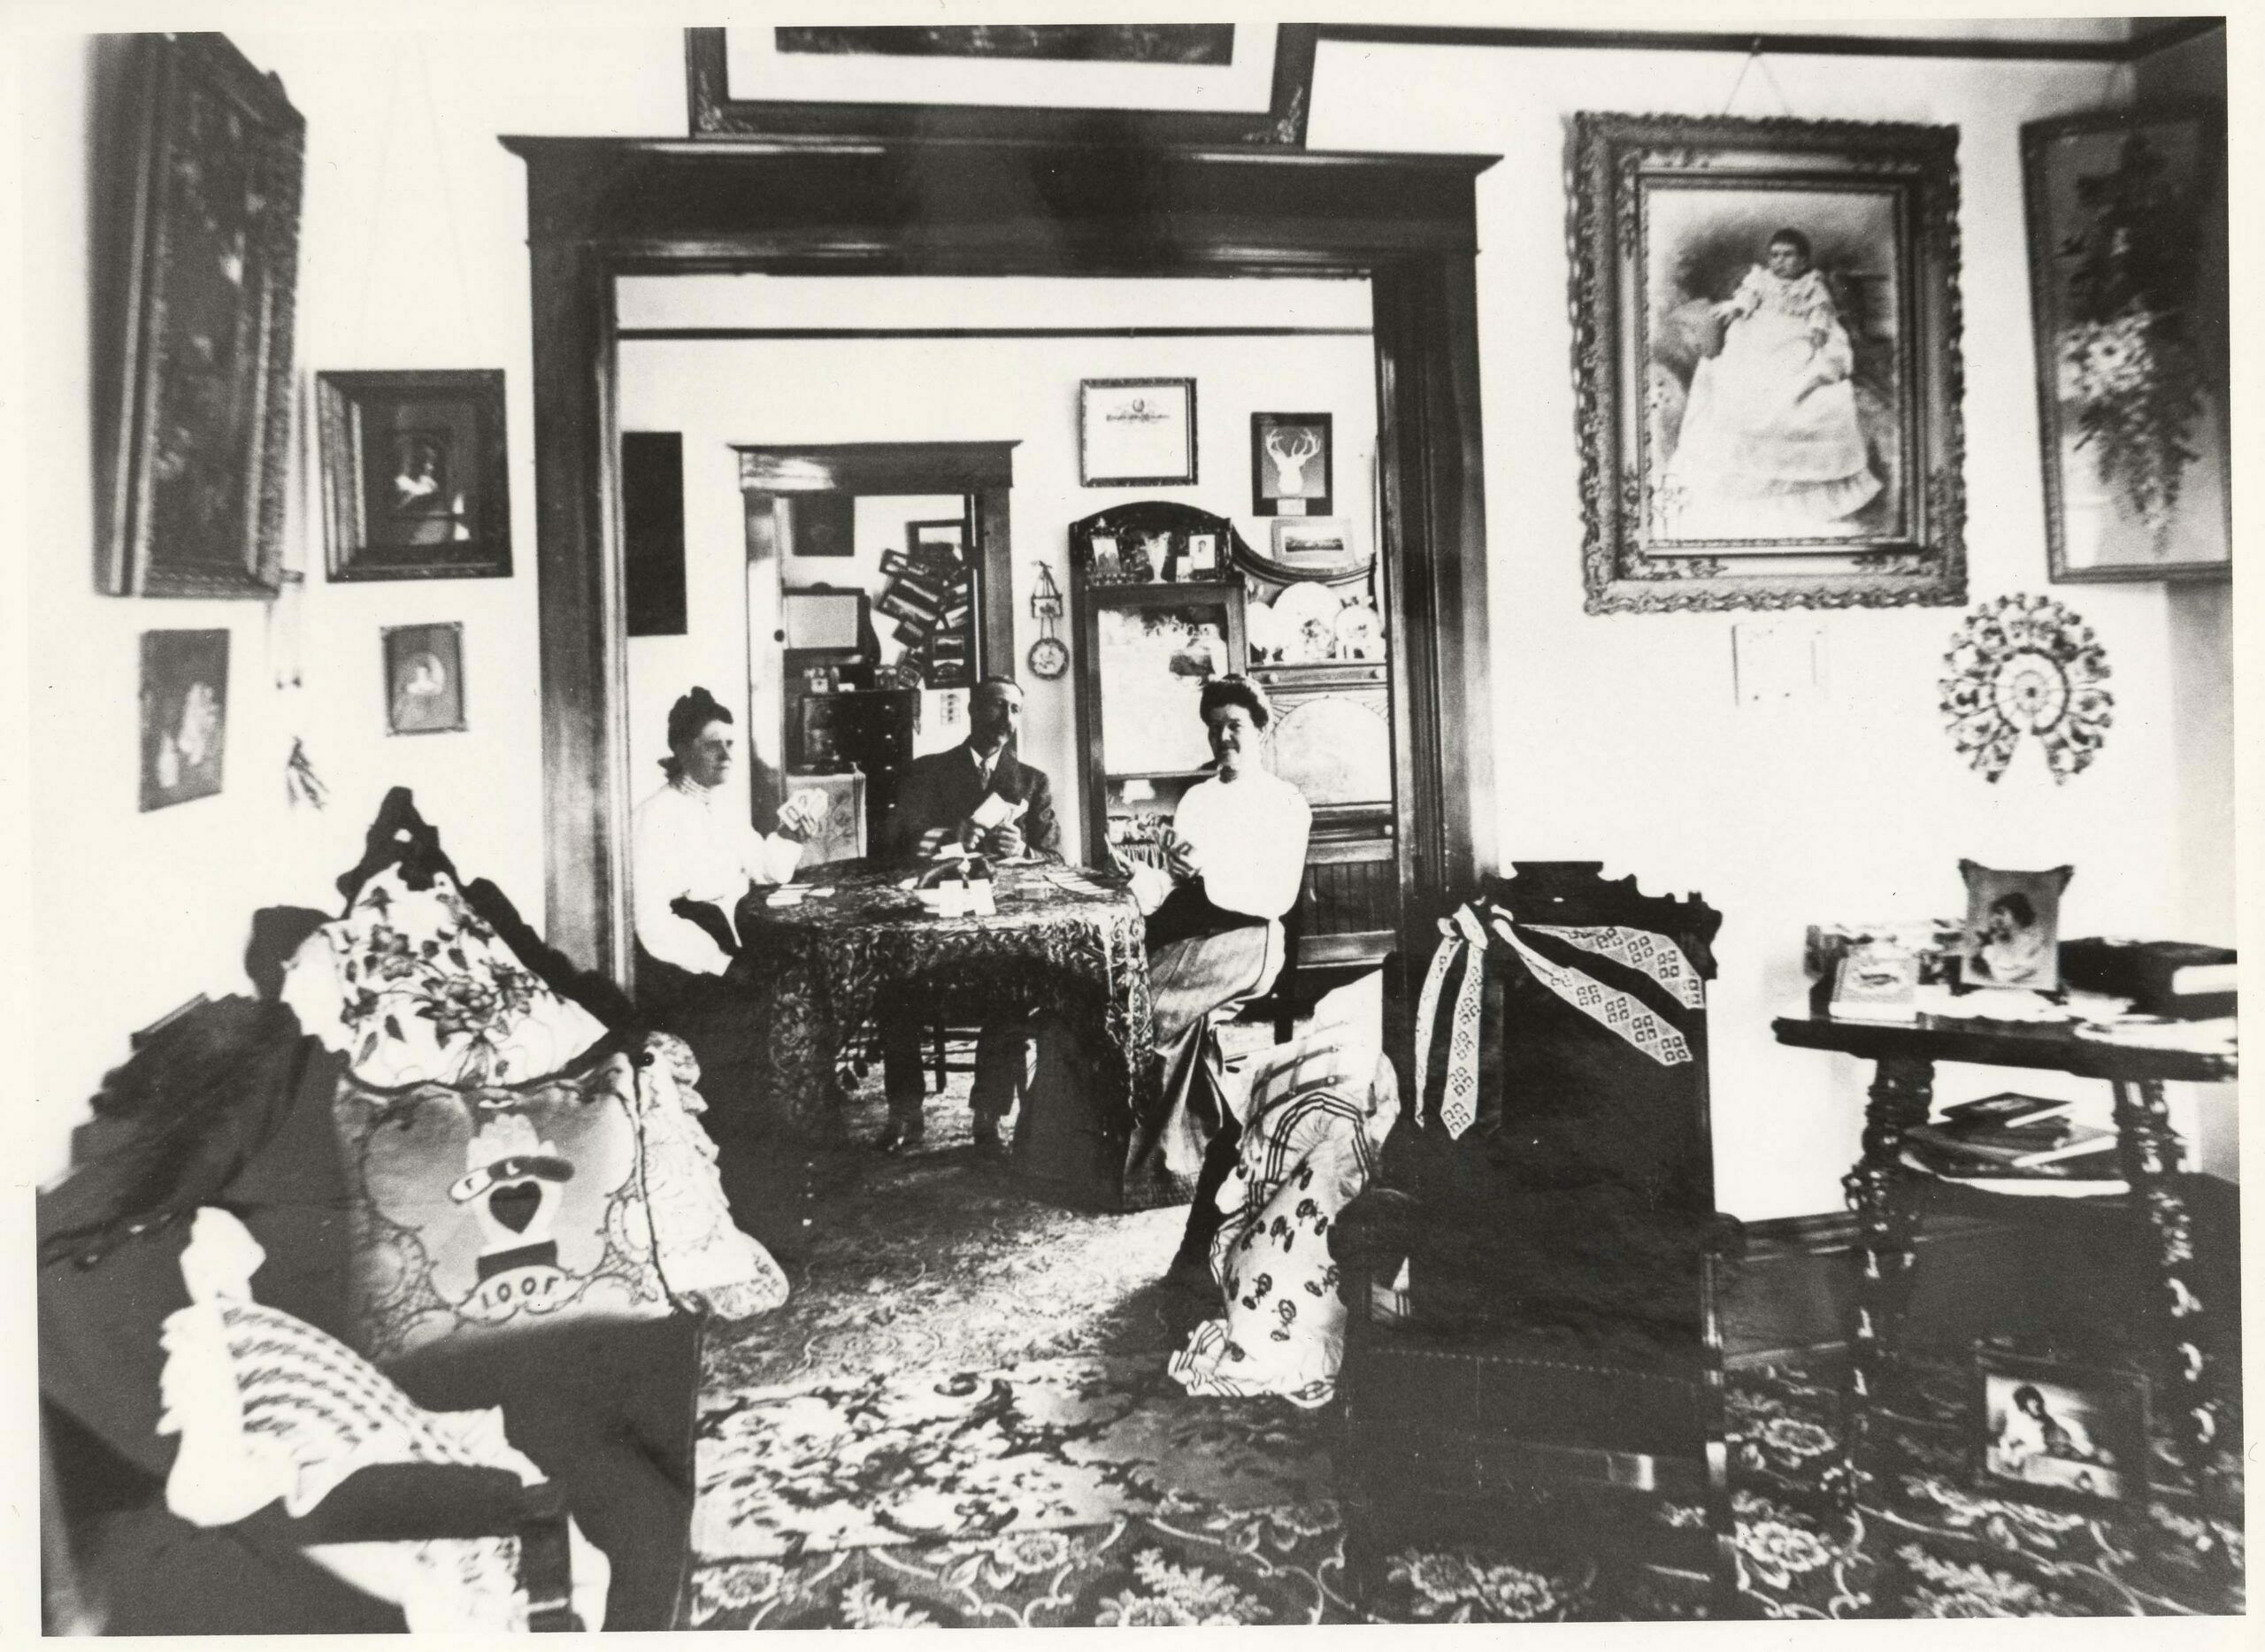 Late 19th century middle class living is evident in this Salida home, believed to be that of local photographer N. W. Meigs. The family plays cards amid busy decorations that include chair drapes, stacked pillows, heavy framed photographs and dark wood furnishings.  (1)